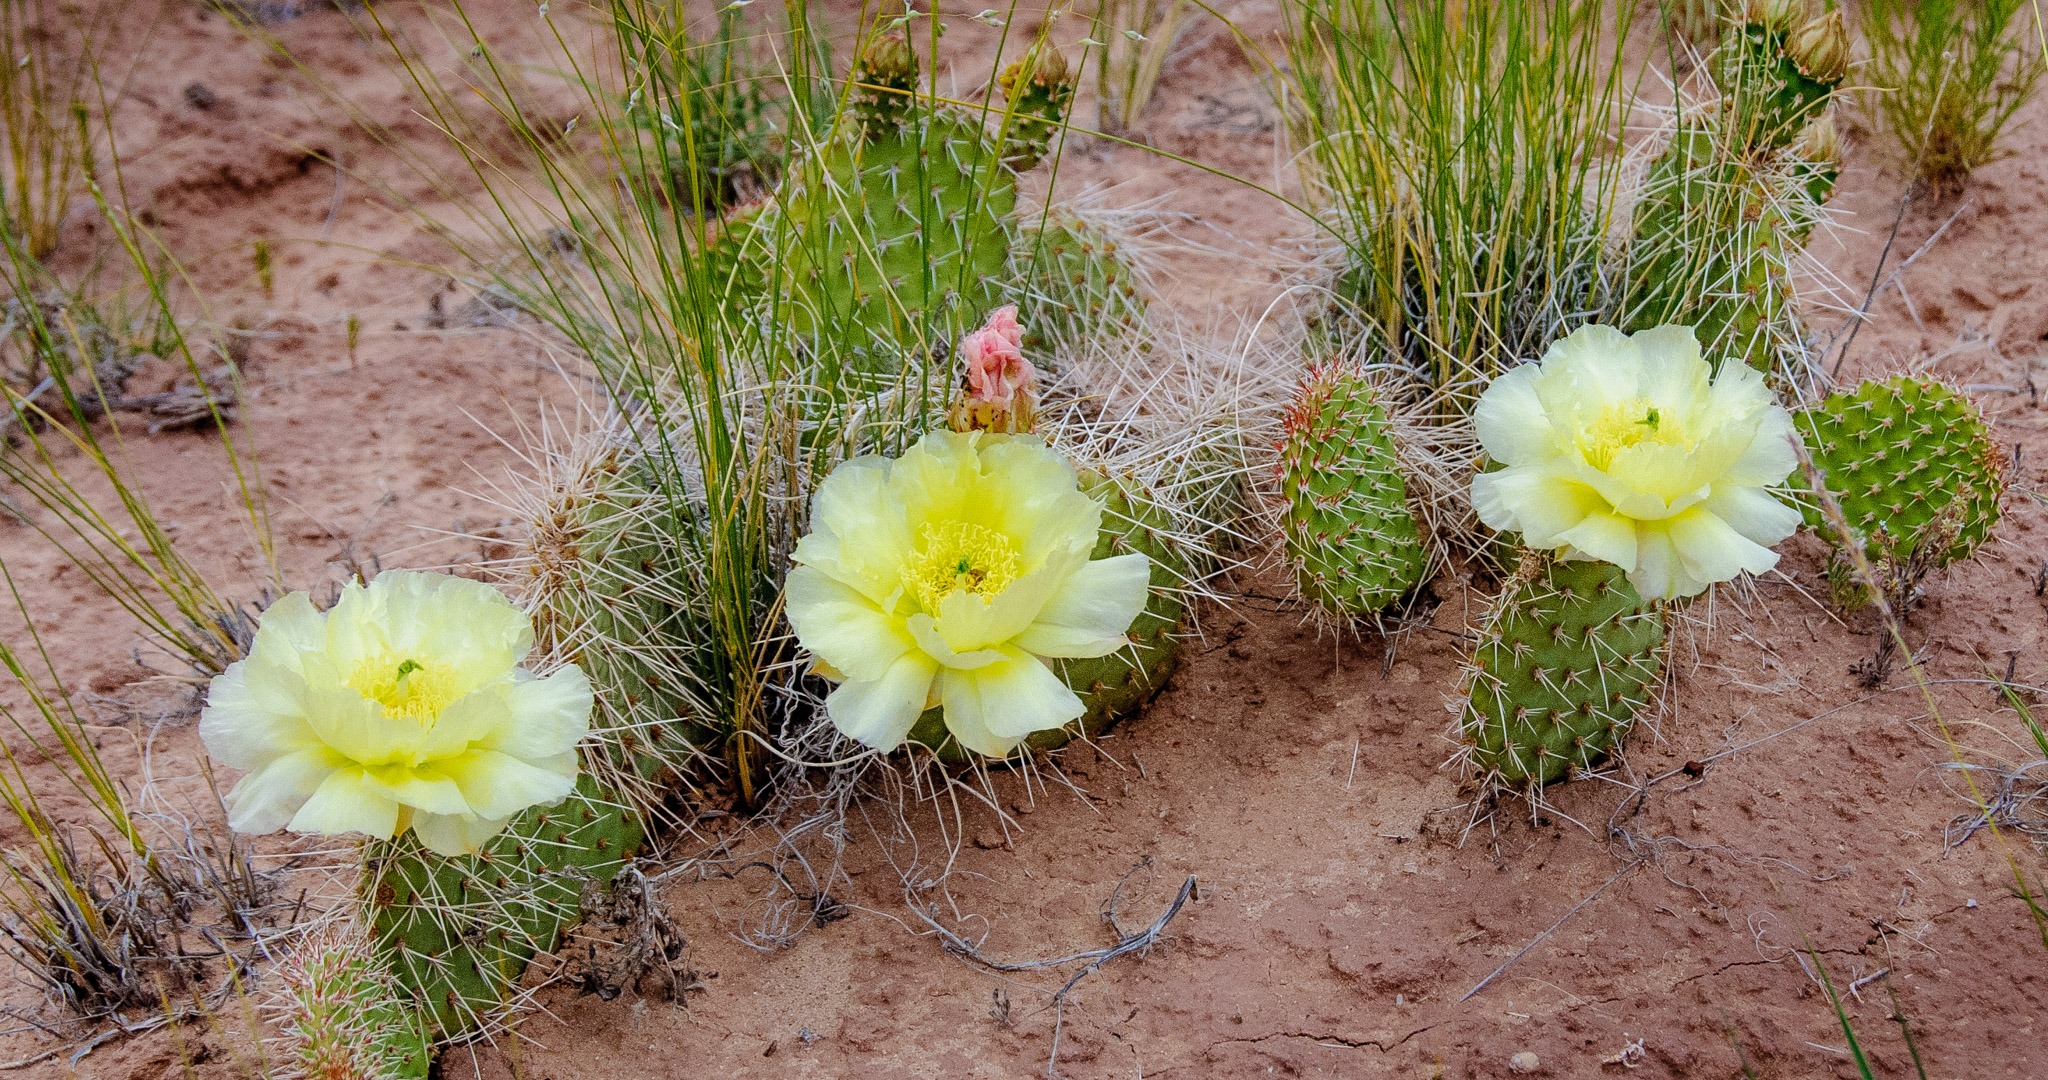 These pale yellow blossoms adorn these prickly pear cacti along Cathedral Road in Capitol Reef National Park, Utah.